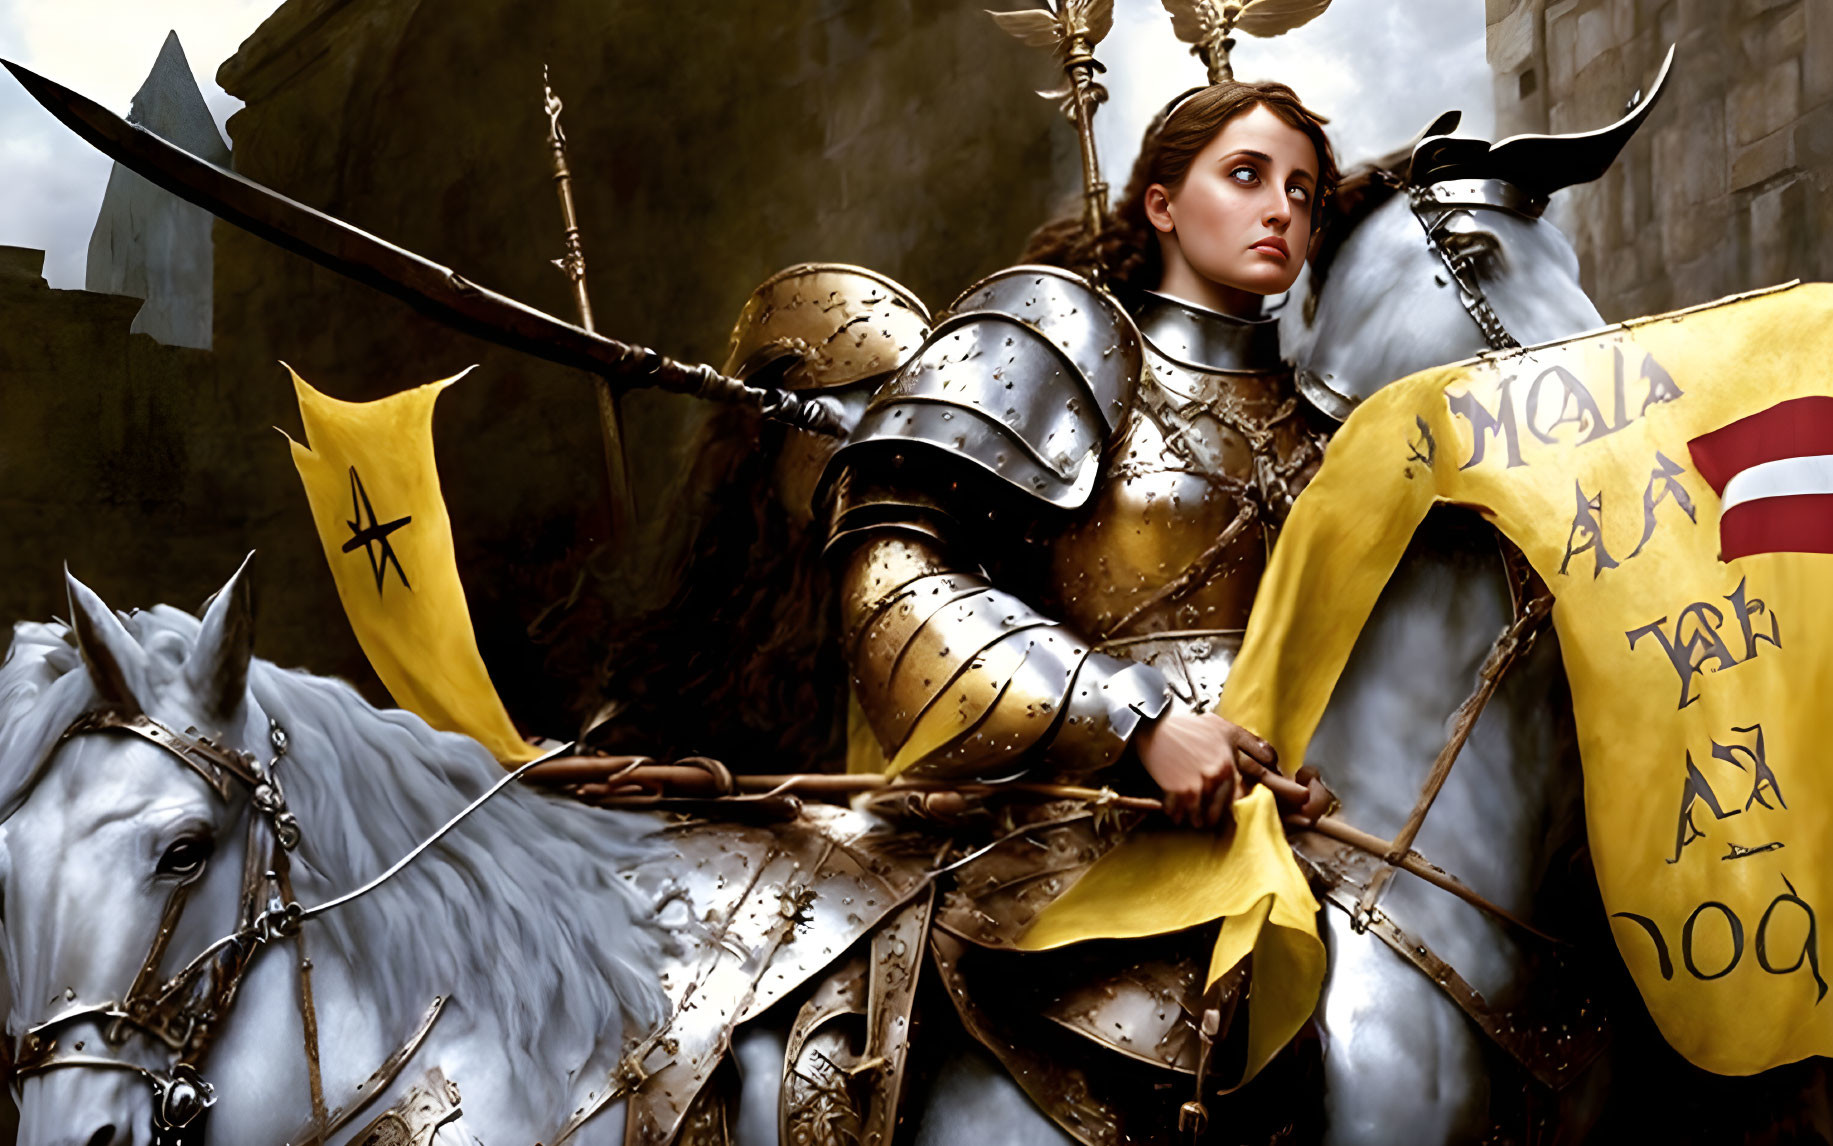 Medieval female knight in golden armor on white horse with spear and cross flag